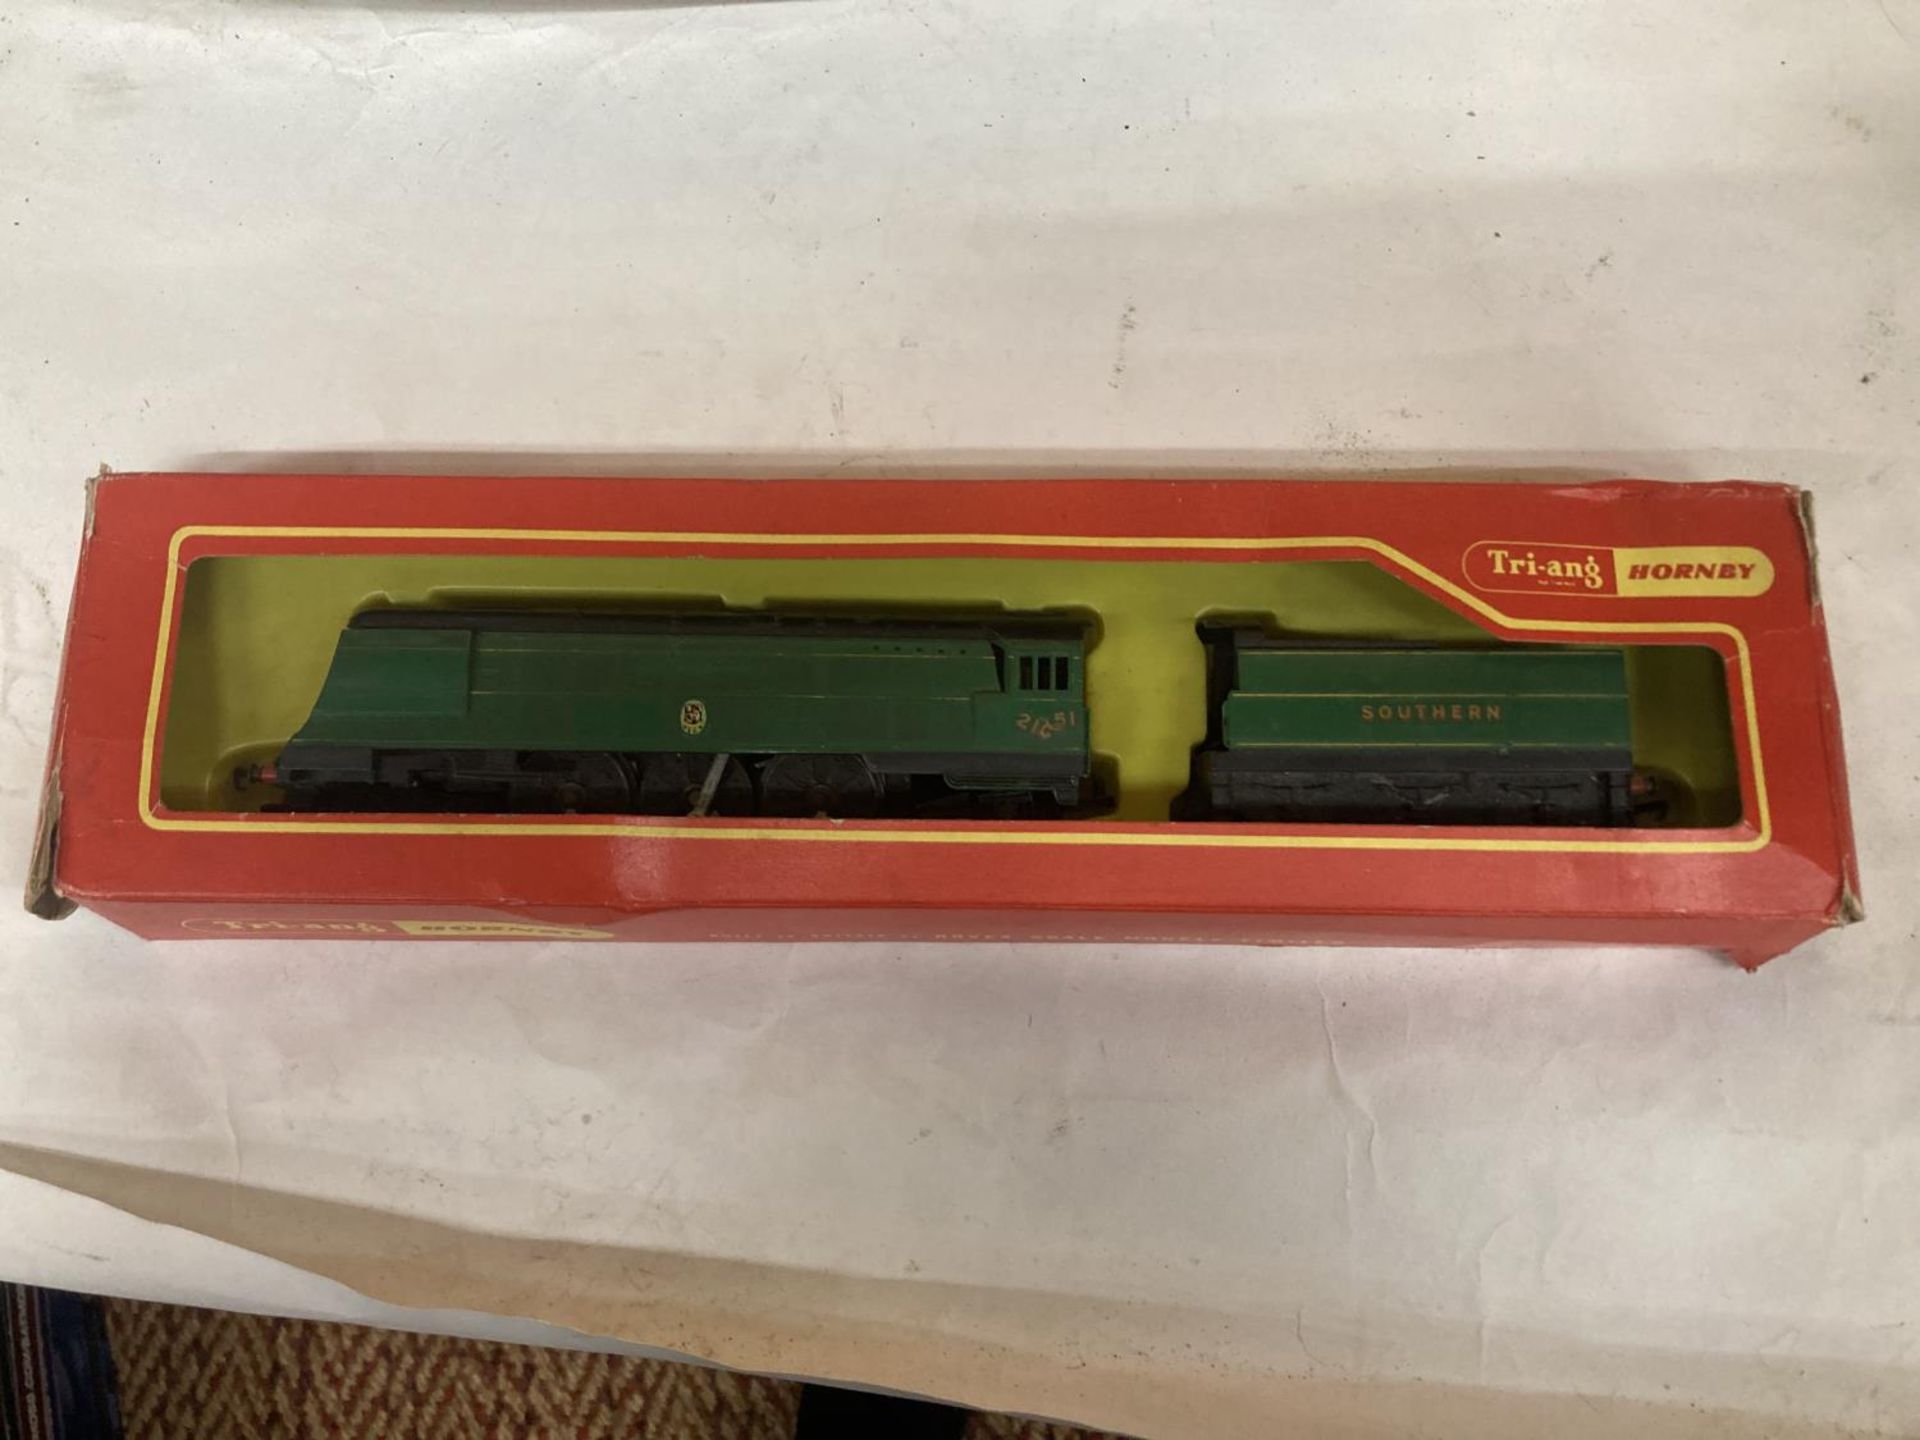 A TRI-ANG HORNBY MODEL OF SOUTHERN GOLDEN ARROW 4-6-2 LOCOMOTIVE WINSTON CHURCHILL IN BOX